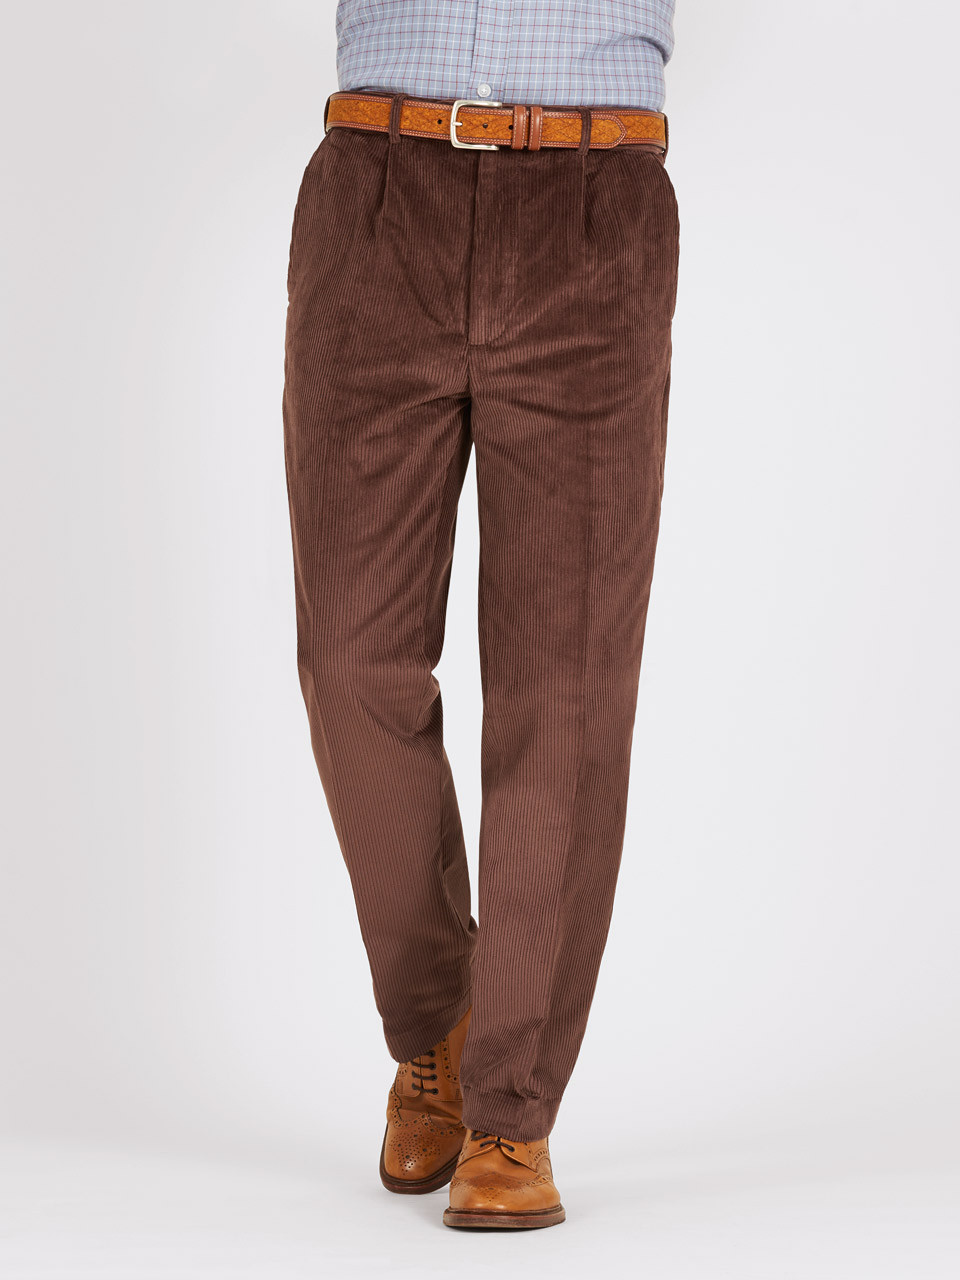 Corduroy Trousers  Mens Pleated Trousers  FT  FormThread